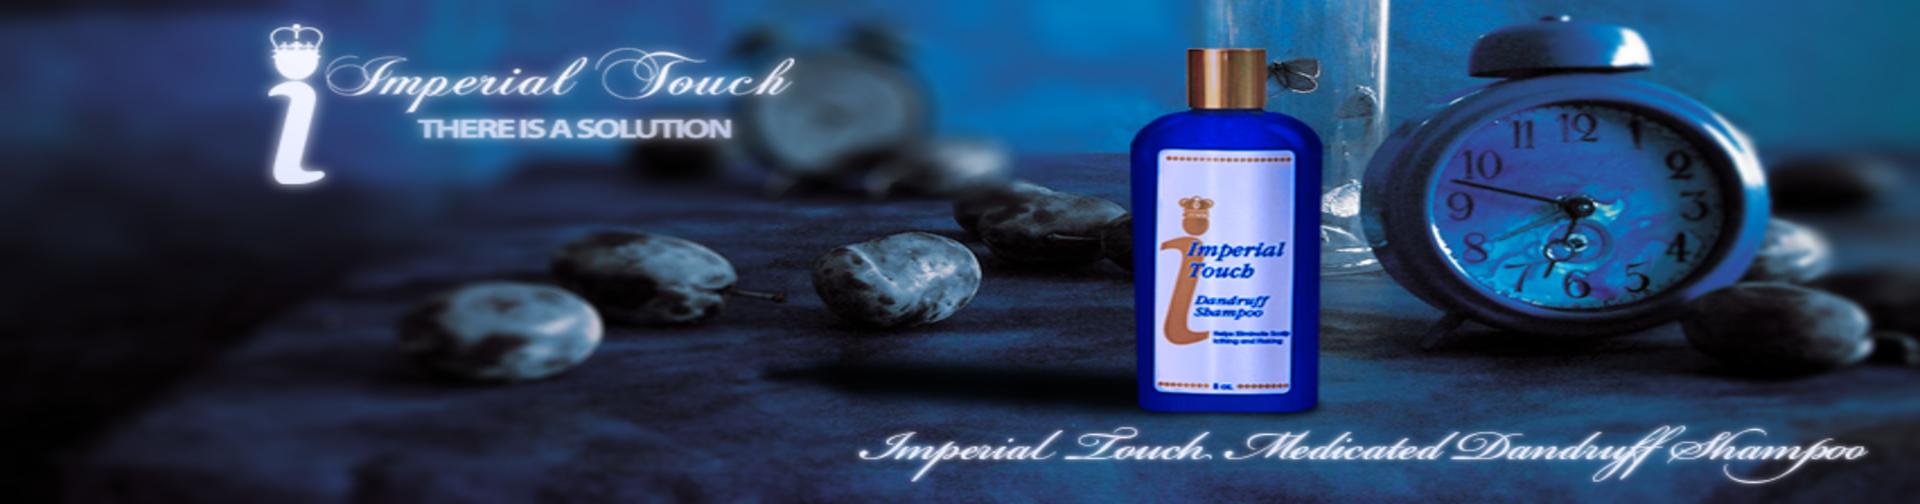 Brand Imperialtouch